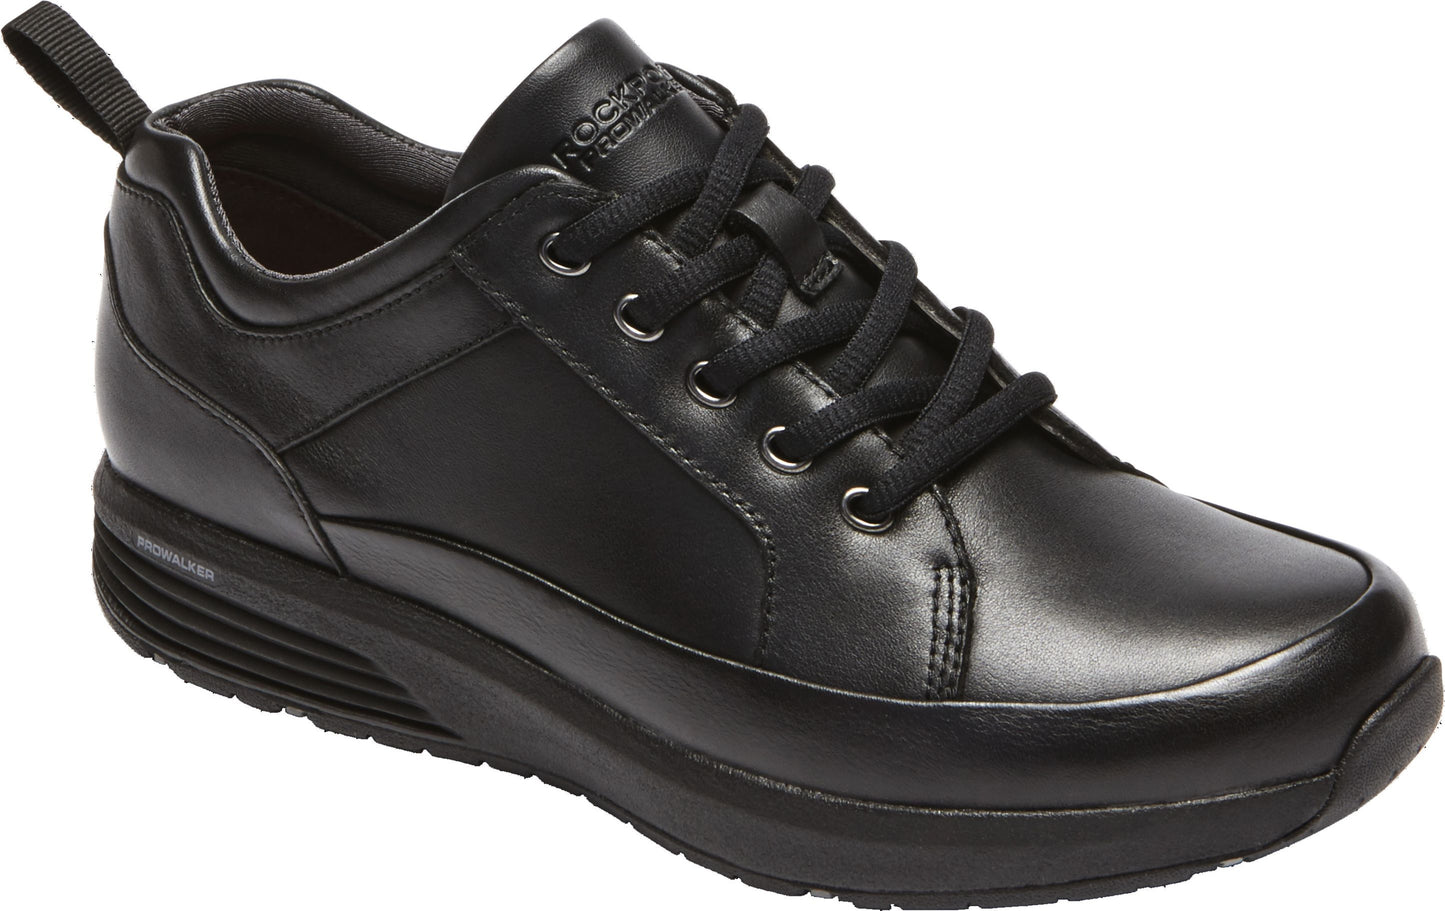 Rockport Shoes Trustride Waterproof Lace To Toe Black